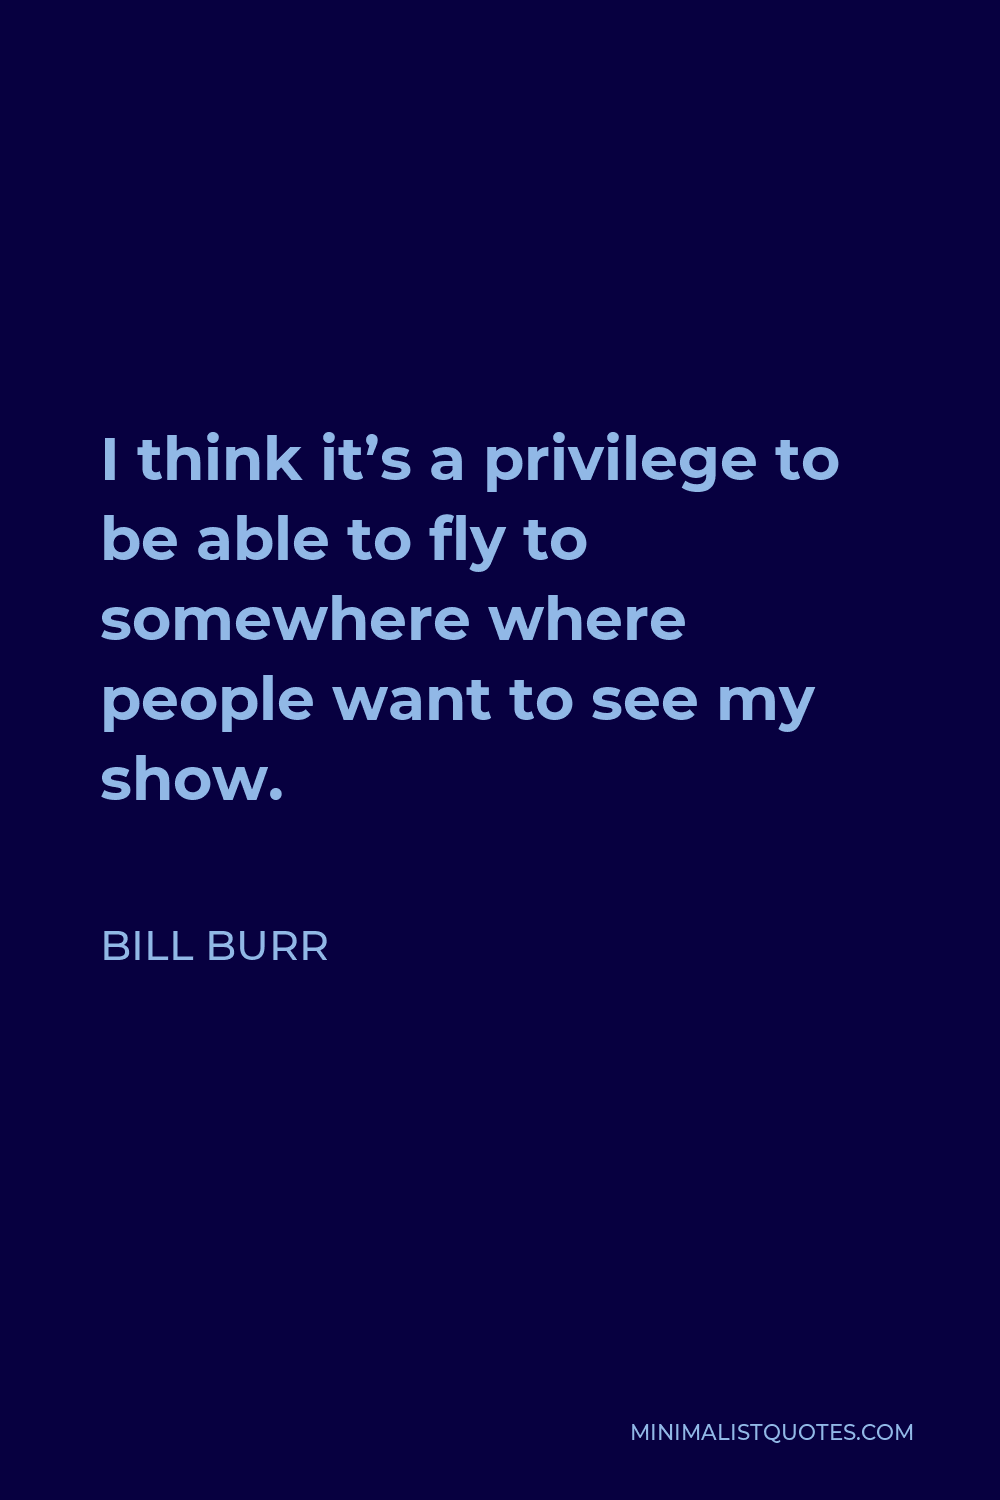 Bill Burr Quote - I think it’s a privilege to be able to fly to somewhere where people want to see my show.